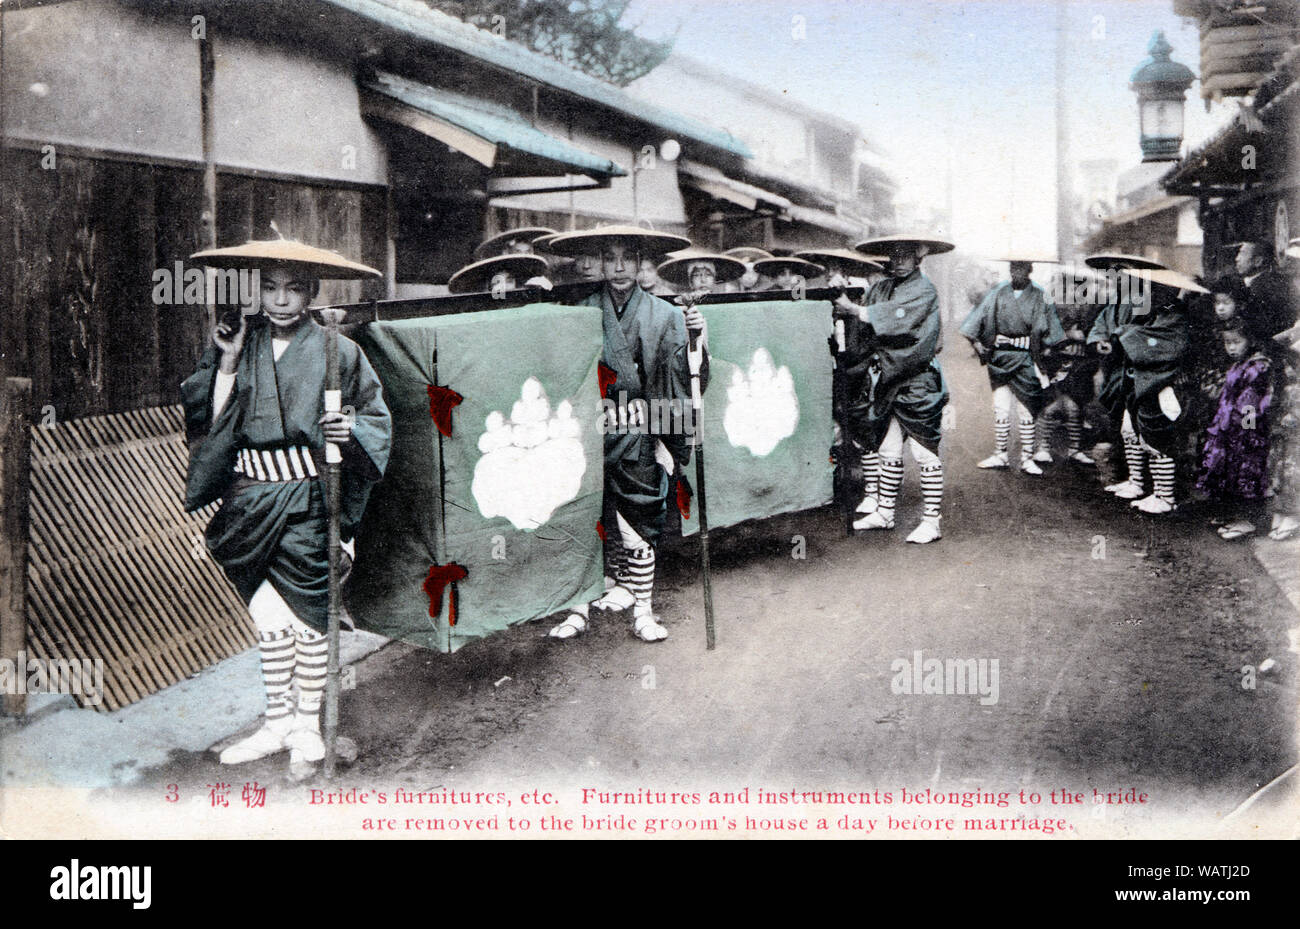 [ 1900s Japan - Japanese Bride's Trousseau ] —   Men in special dress carry a new bride’s furniture and belongings from her parental home to the groom’s family home.   Until the late 21st century it was customary to move new furniture ceremoniously to a newly married couple’s home.  20th century vintage postcard. Stock Photo